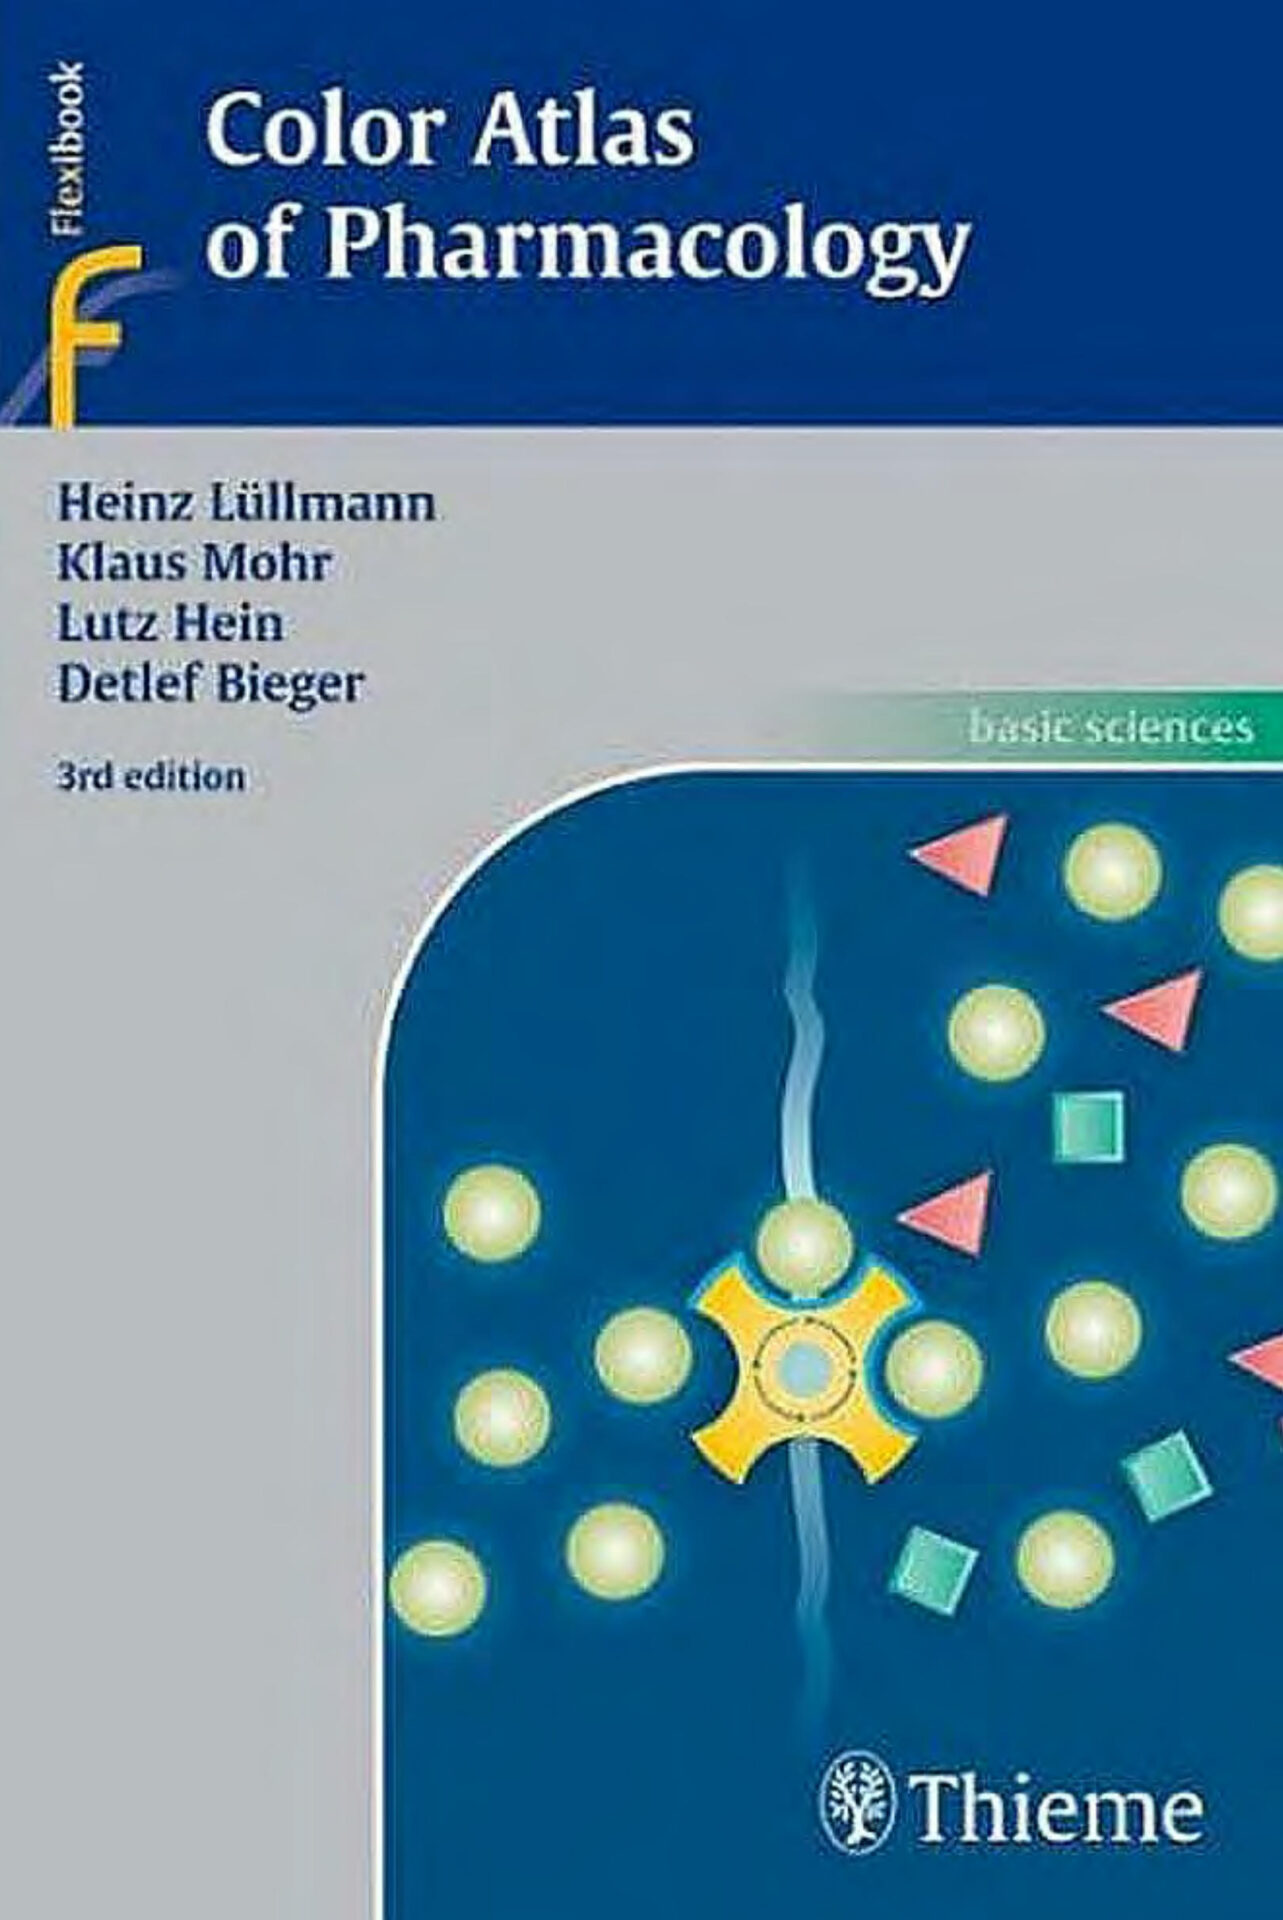 Color Atlas of Pharmacology by Heinz Luellmann 3rd Edition